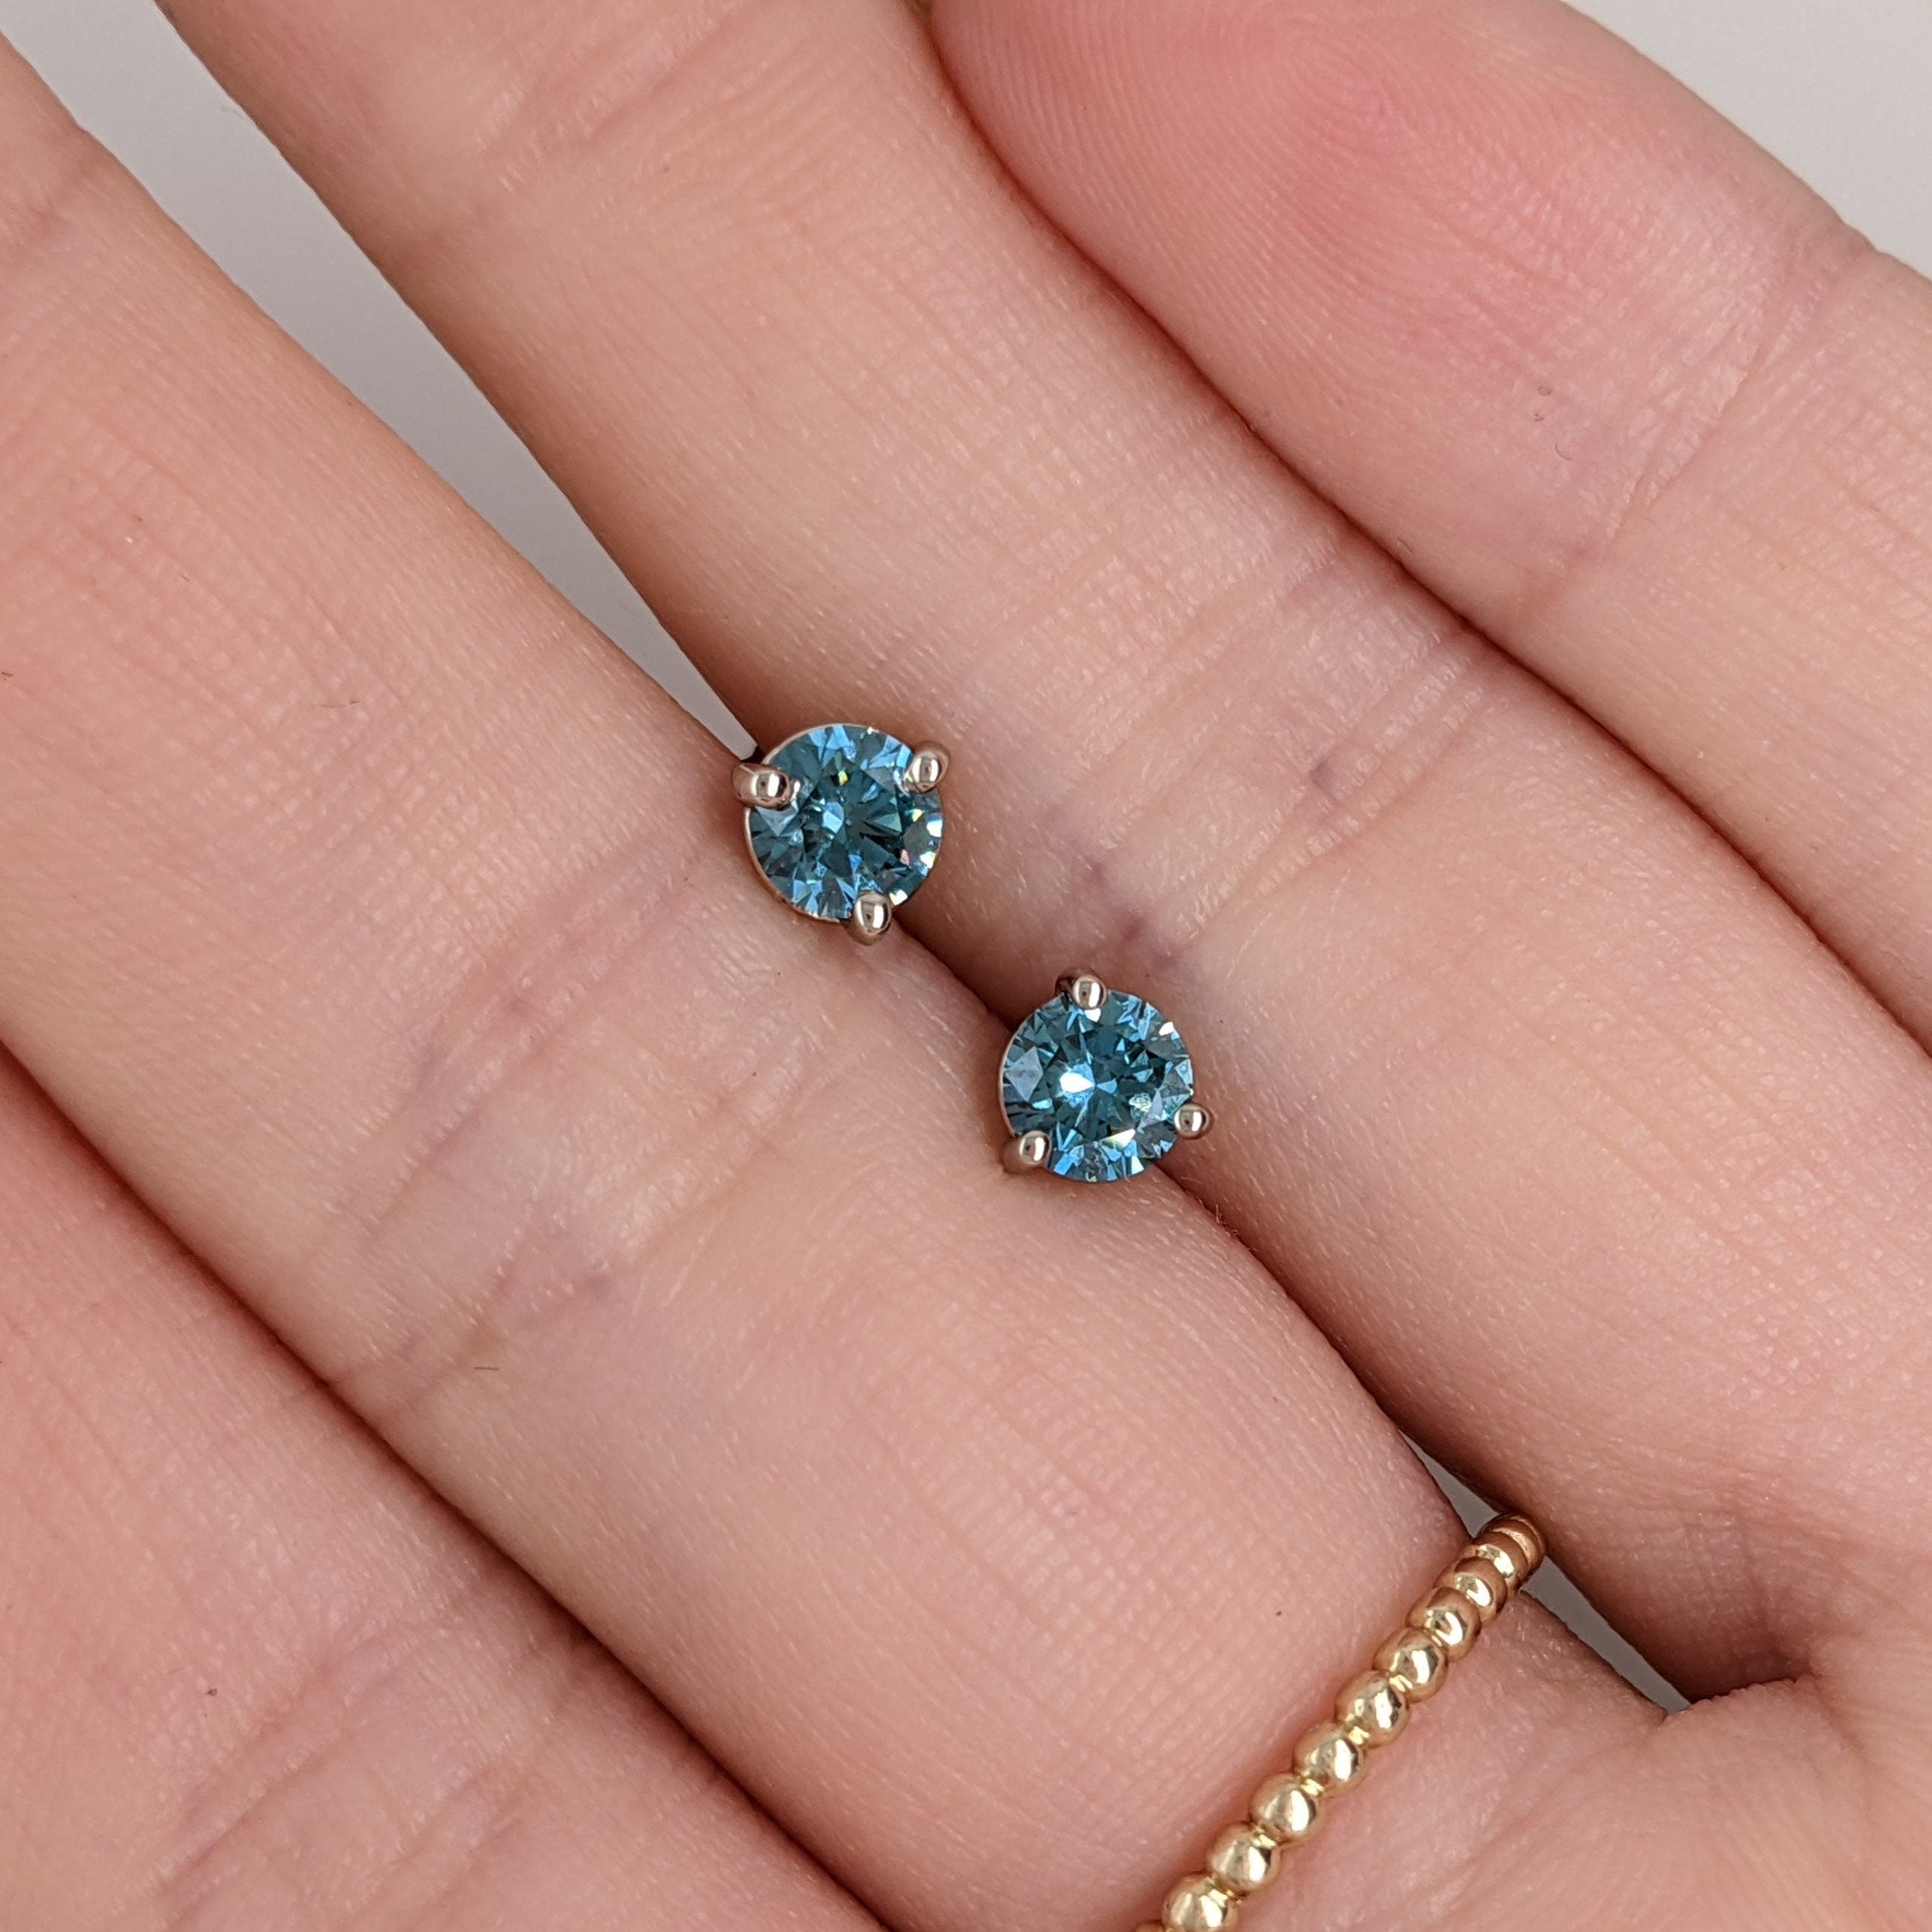 Blue Diamond Studs in Solid 14K White, Yellow or Rose Gold | Round 5mm | Martini 3 Prong | Minimalist | Customizable | Daily Wear Earrings